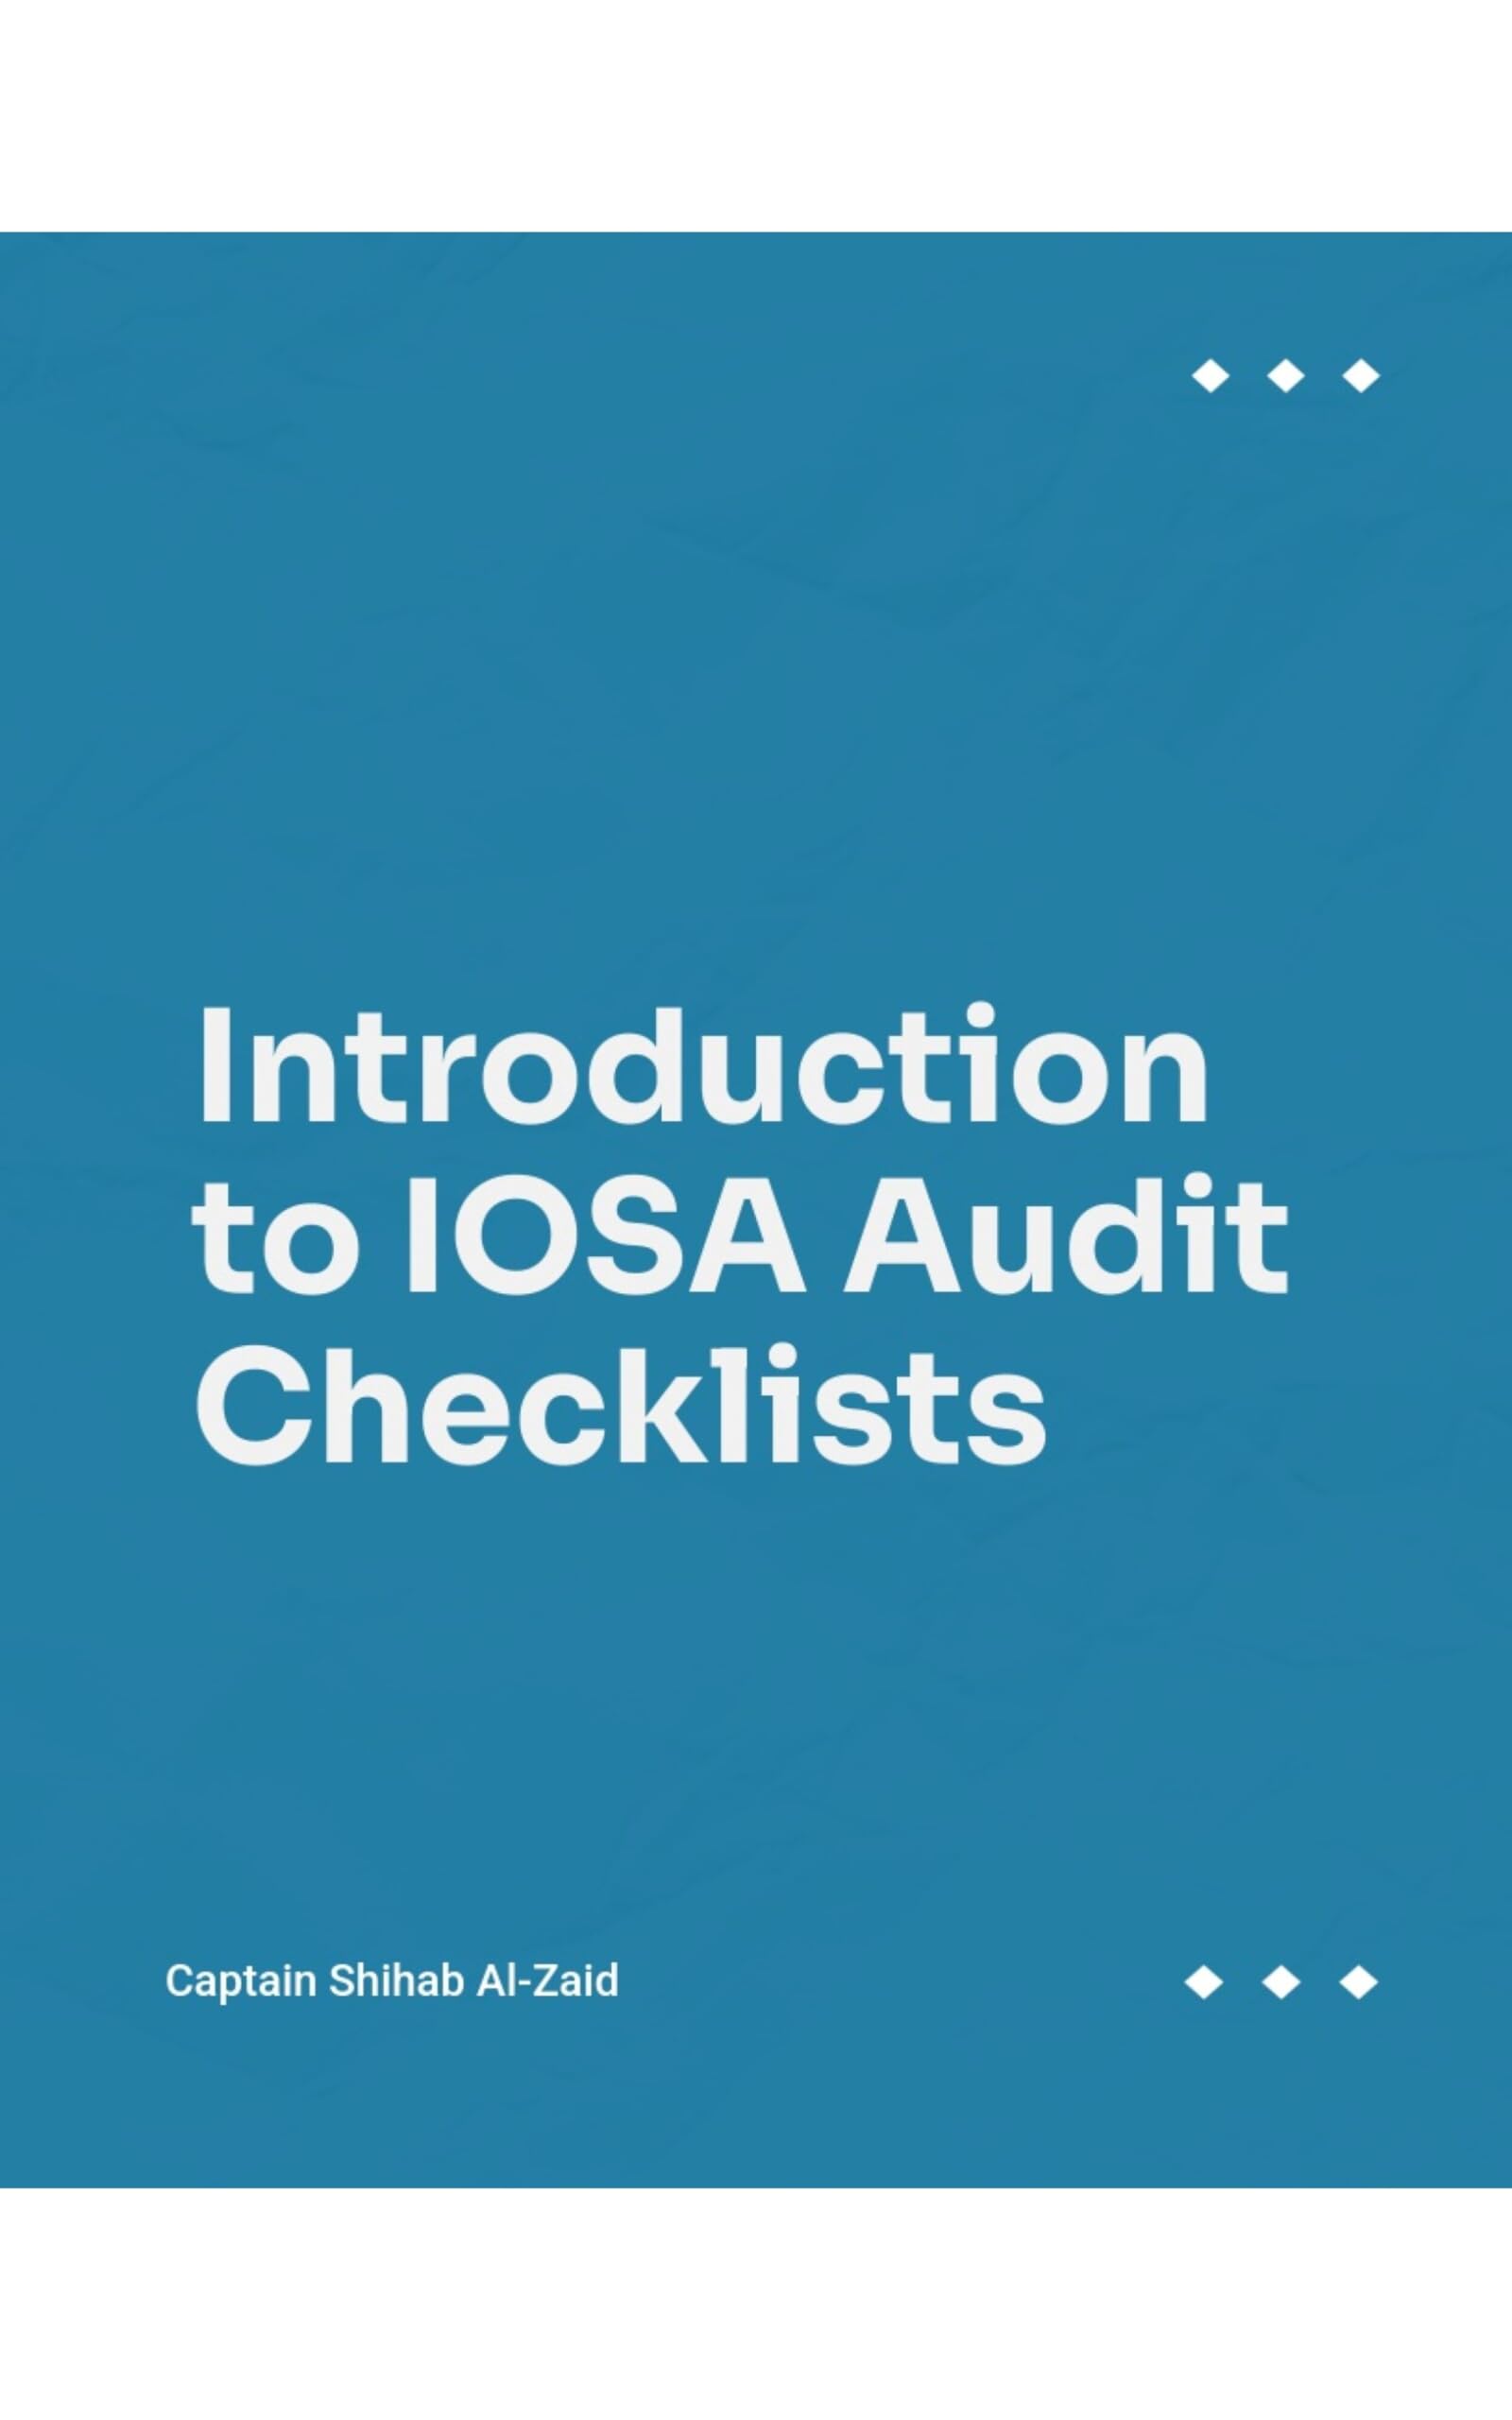 Introduction to IOSA Audit Checklists